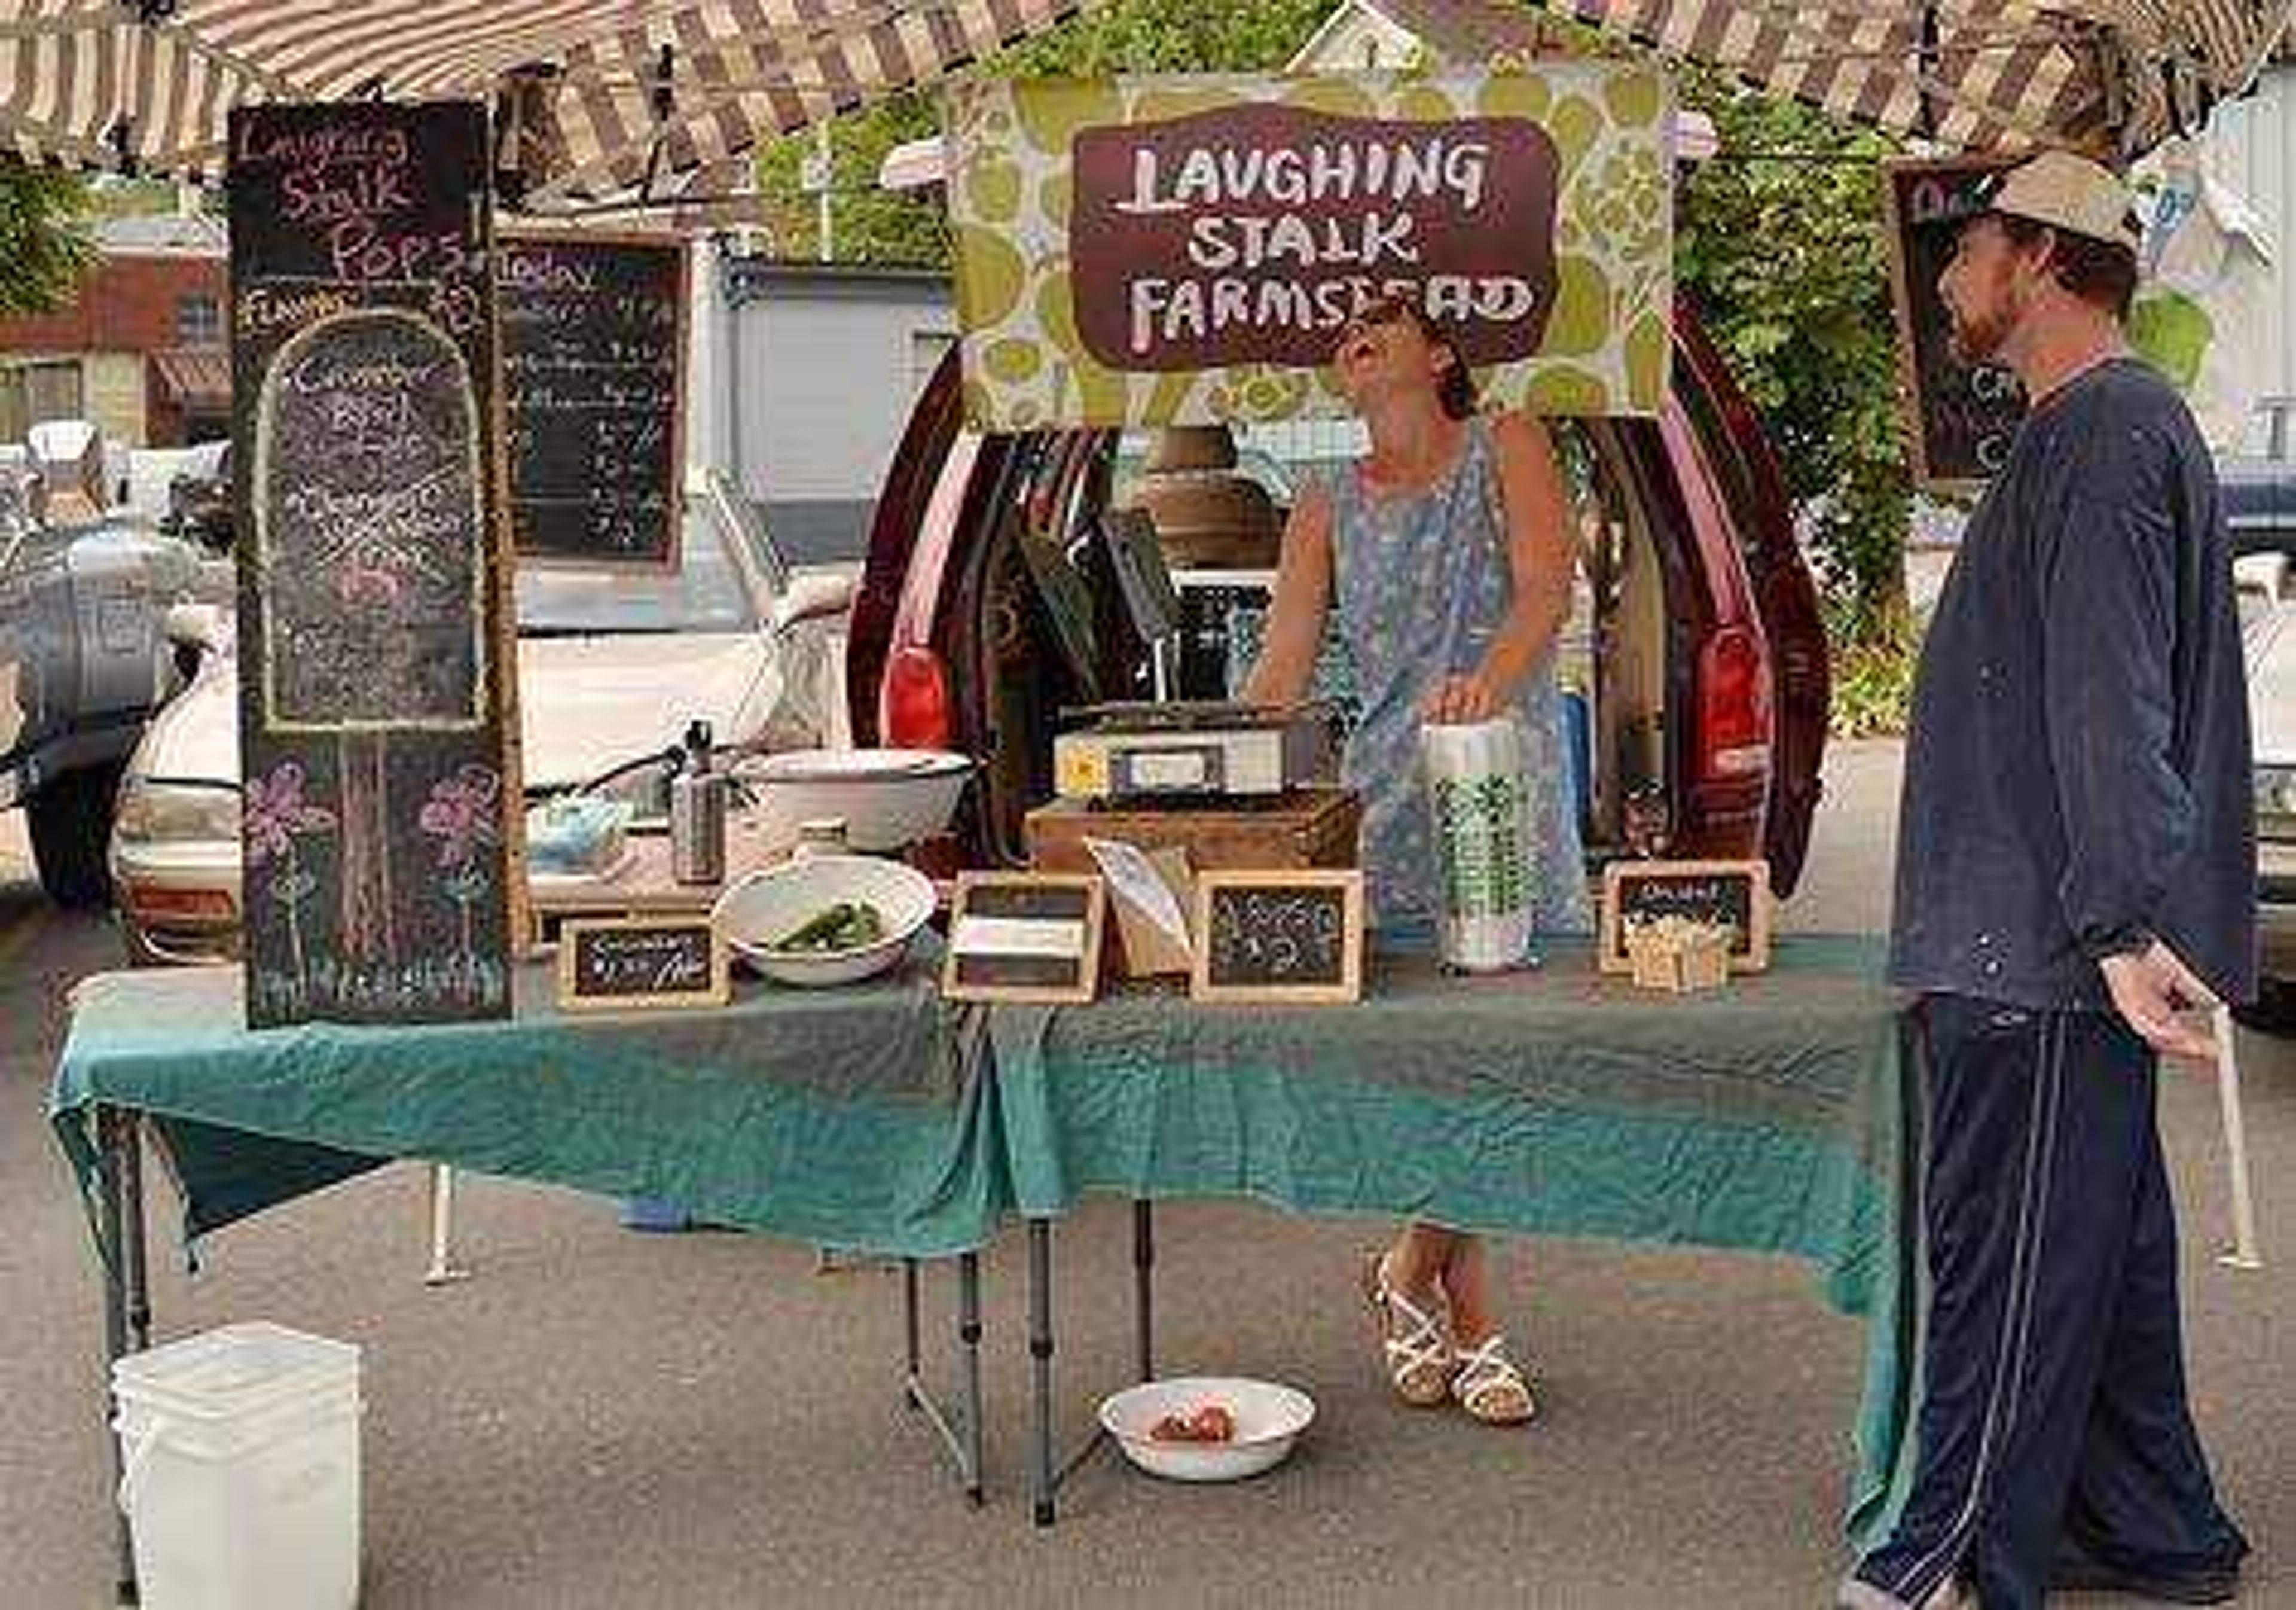 Emily Scifers, owner of Laughing Stalk Farmstead, at her booth at the Cape Riverfront Market. Photo by Amber Hawkins